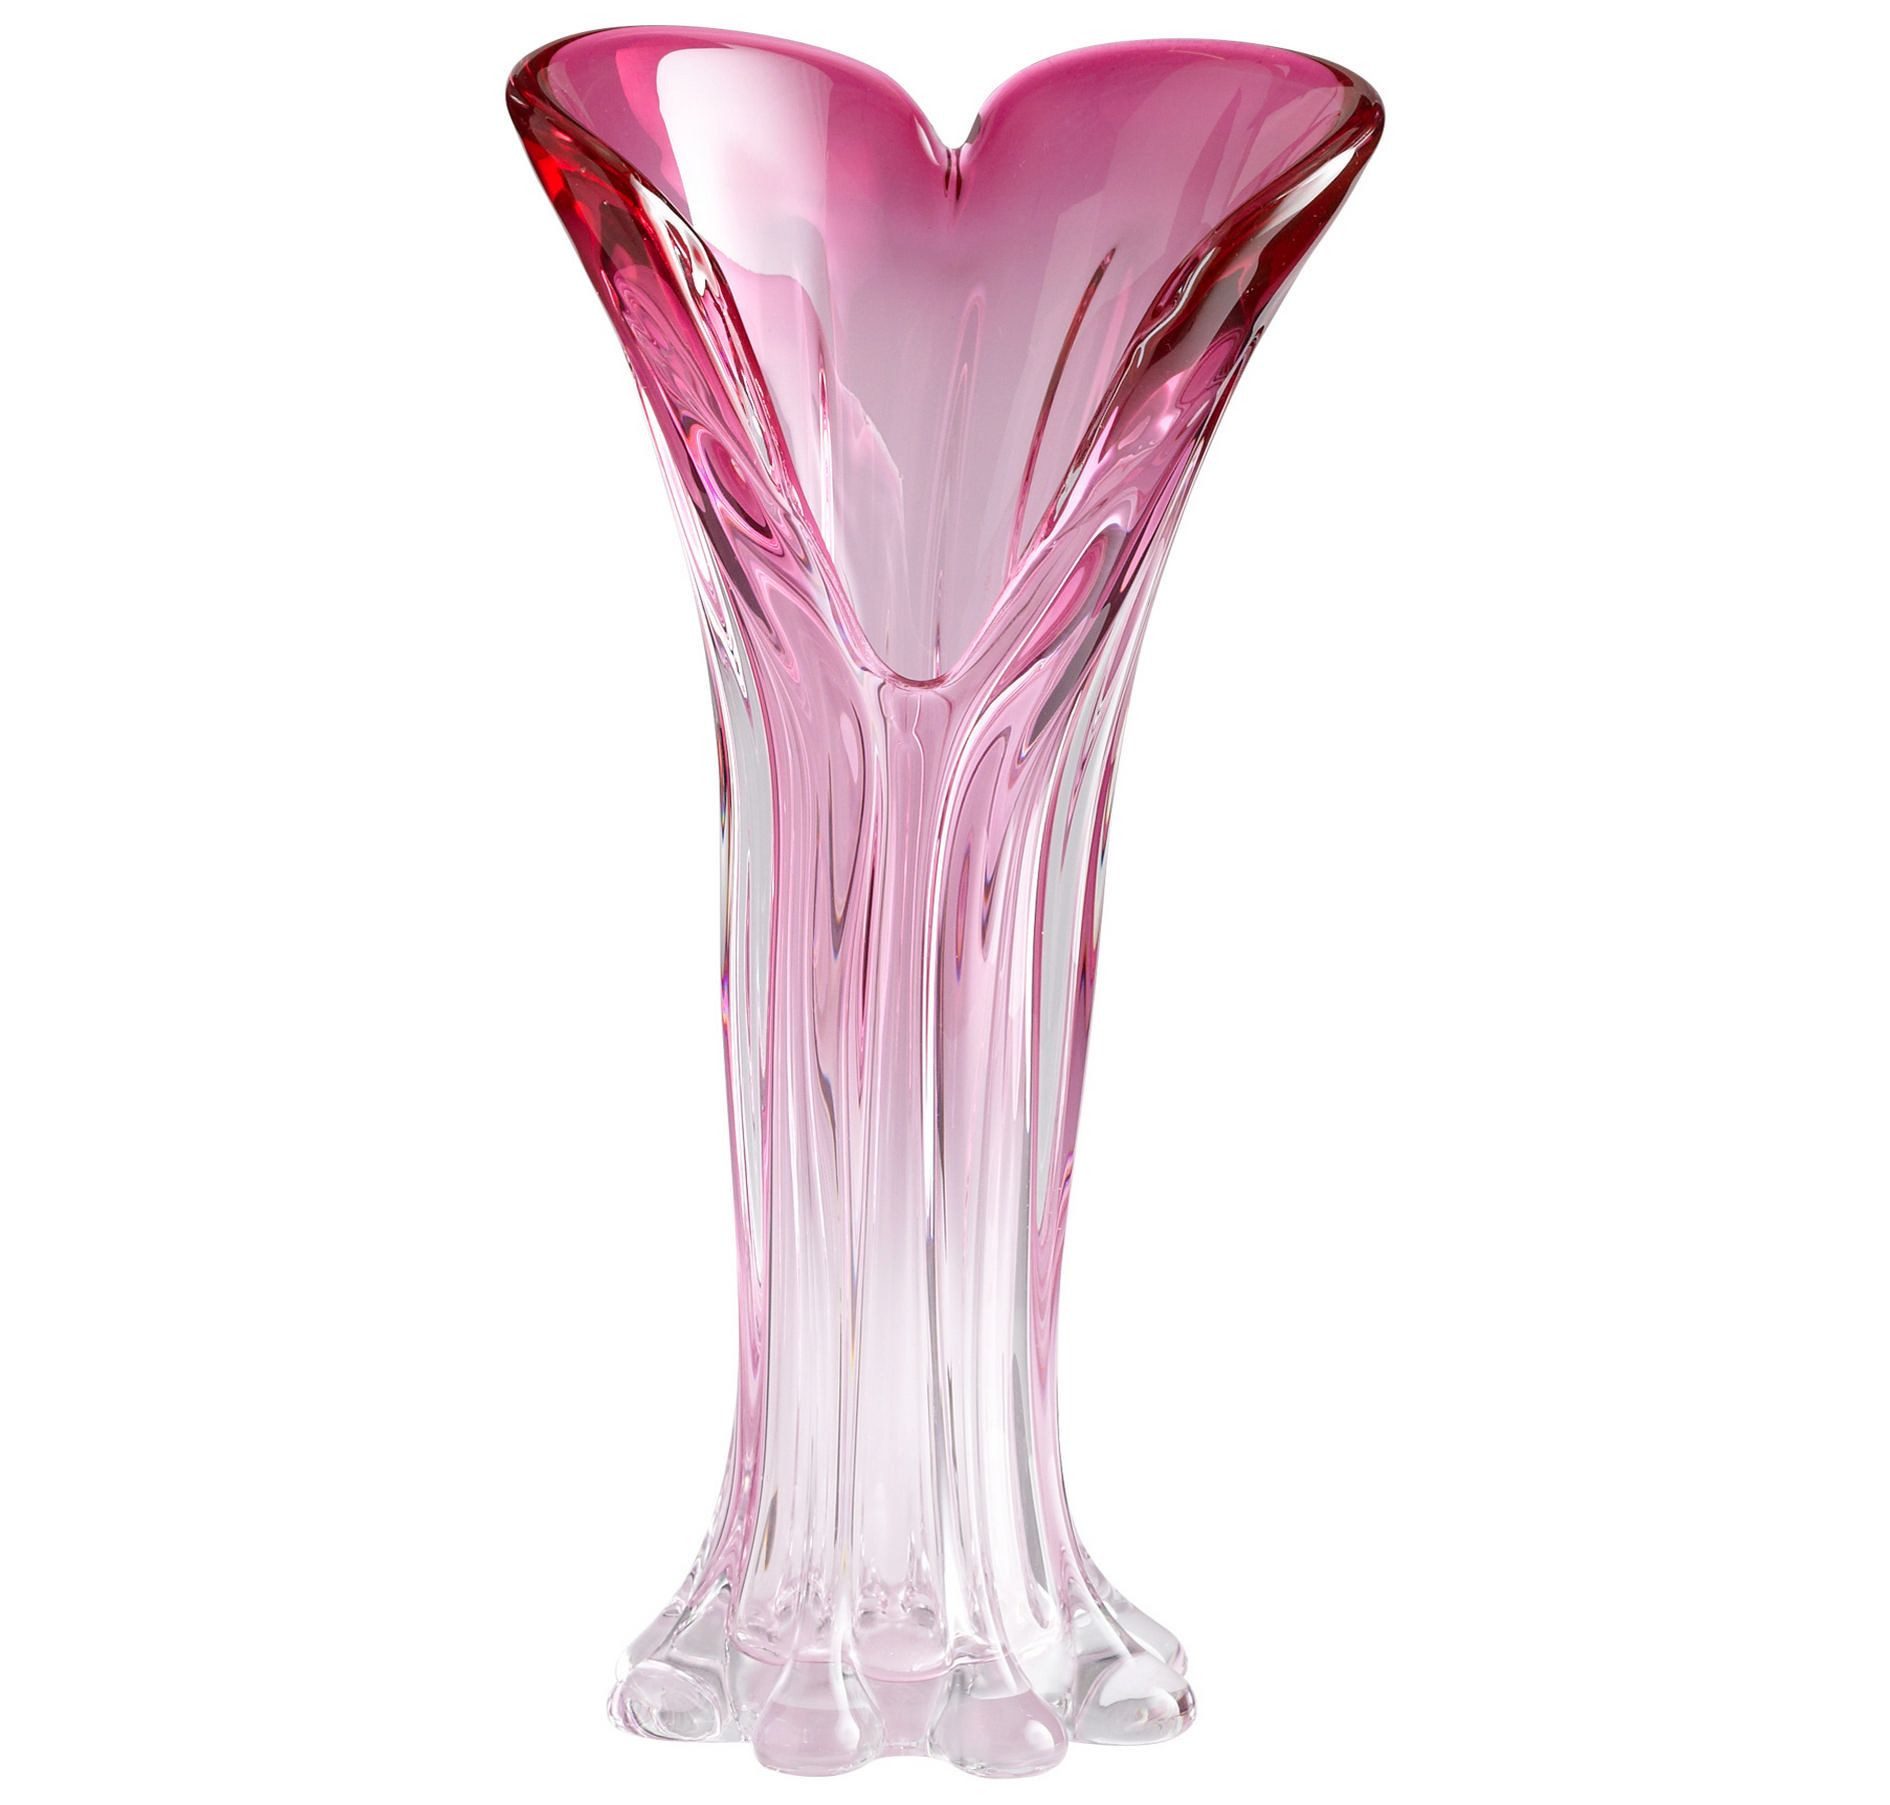 17 Awesome Large Glass Vase with Lid 2024 free download large glass vase with lid of cyan design 05388 large cuore vase in pink finish in home decor with regard to cyan design 05388 large cuore vase in pink finish in home decor vases urns